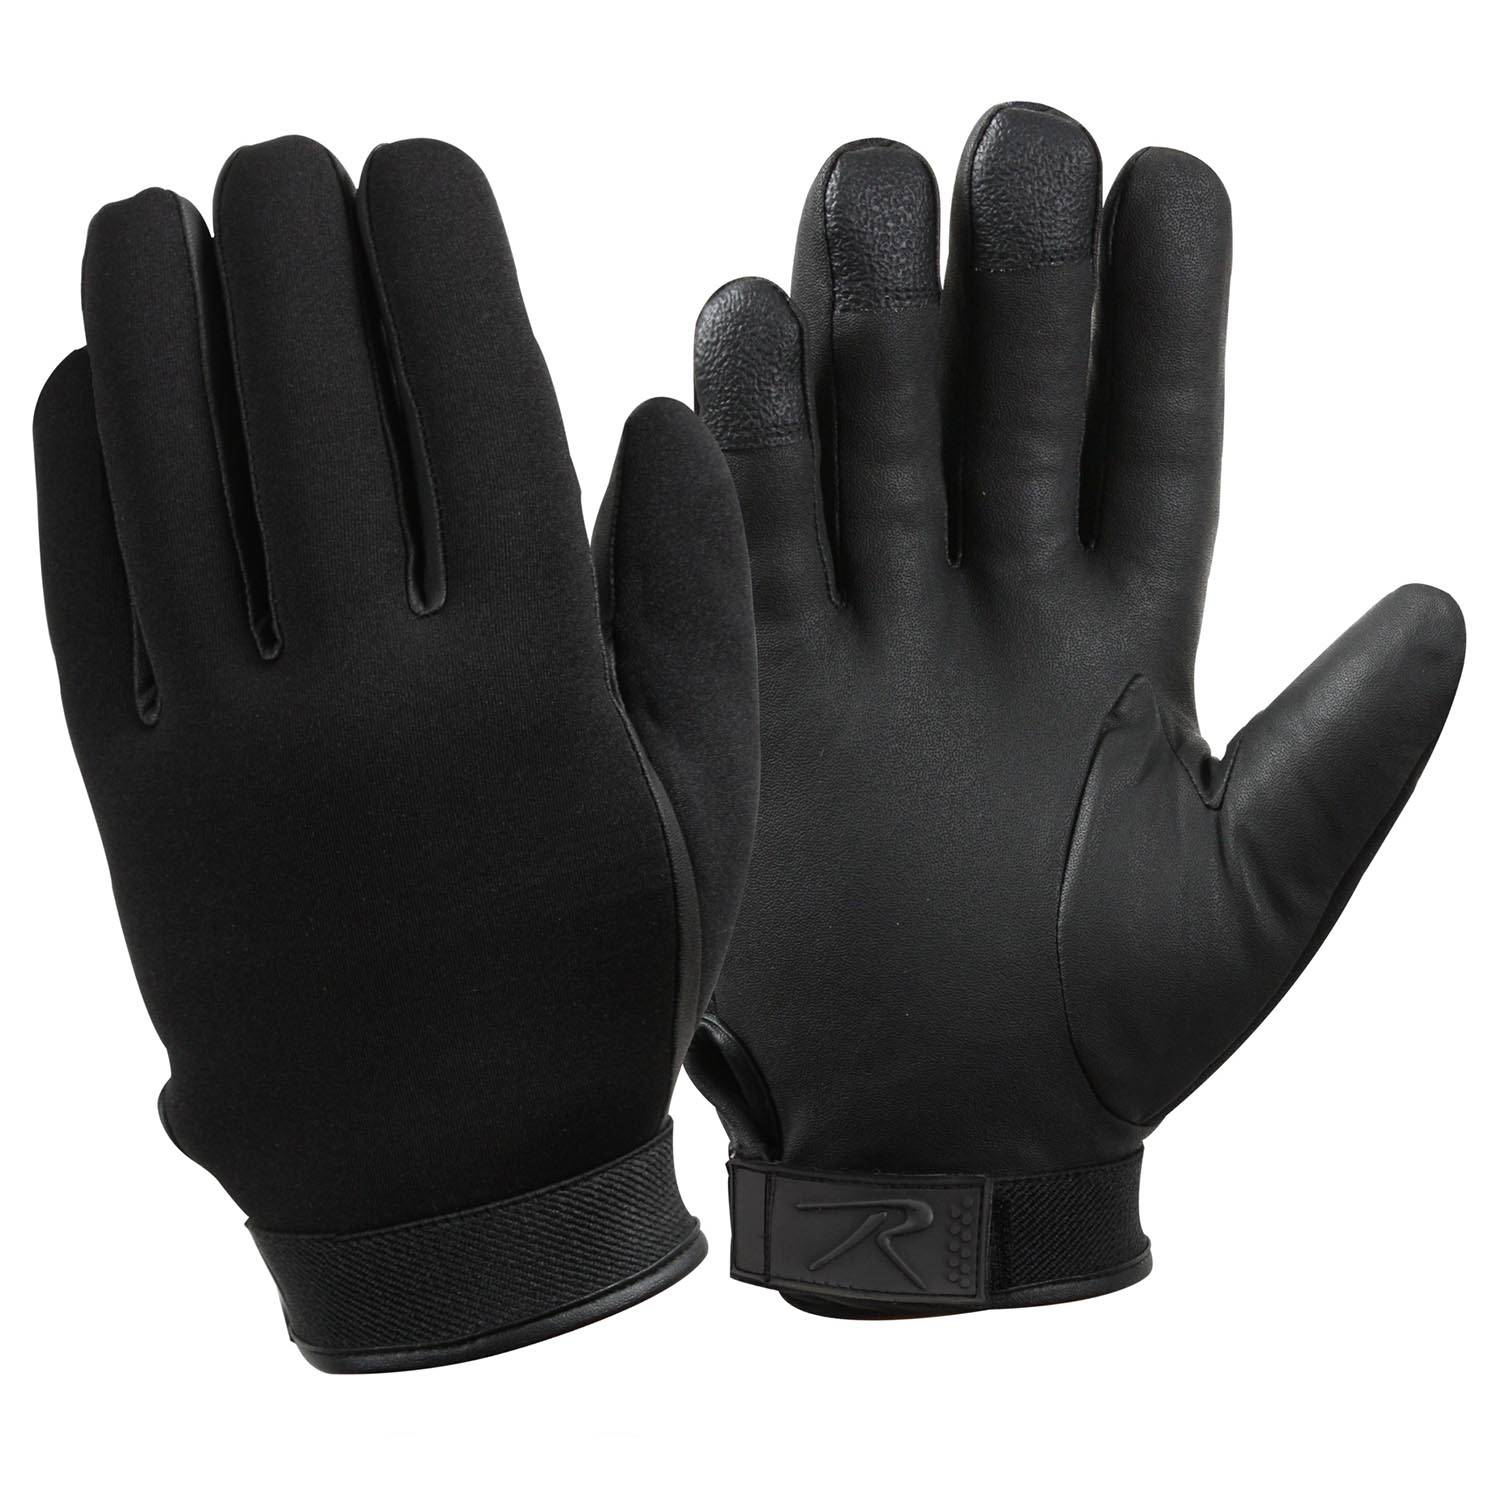 Rothco Cold Weather Neoprene Duty Gloves